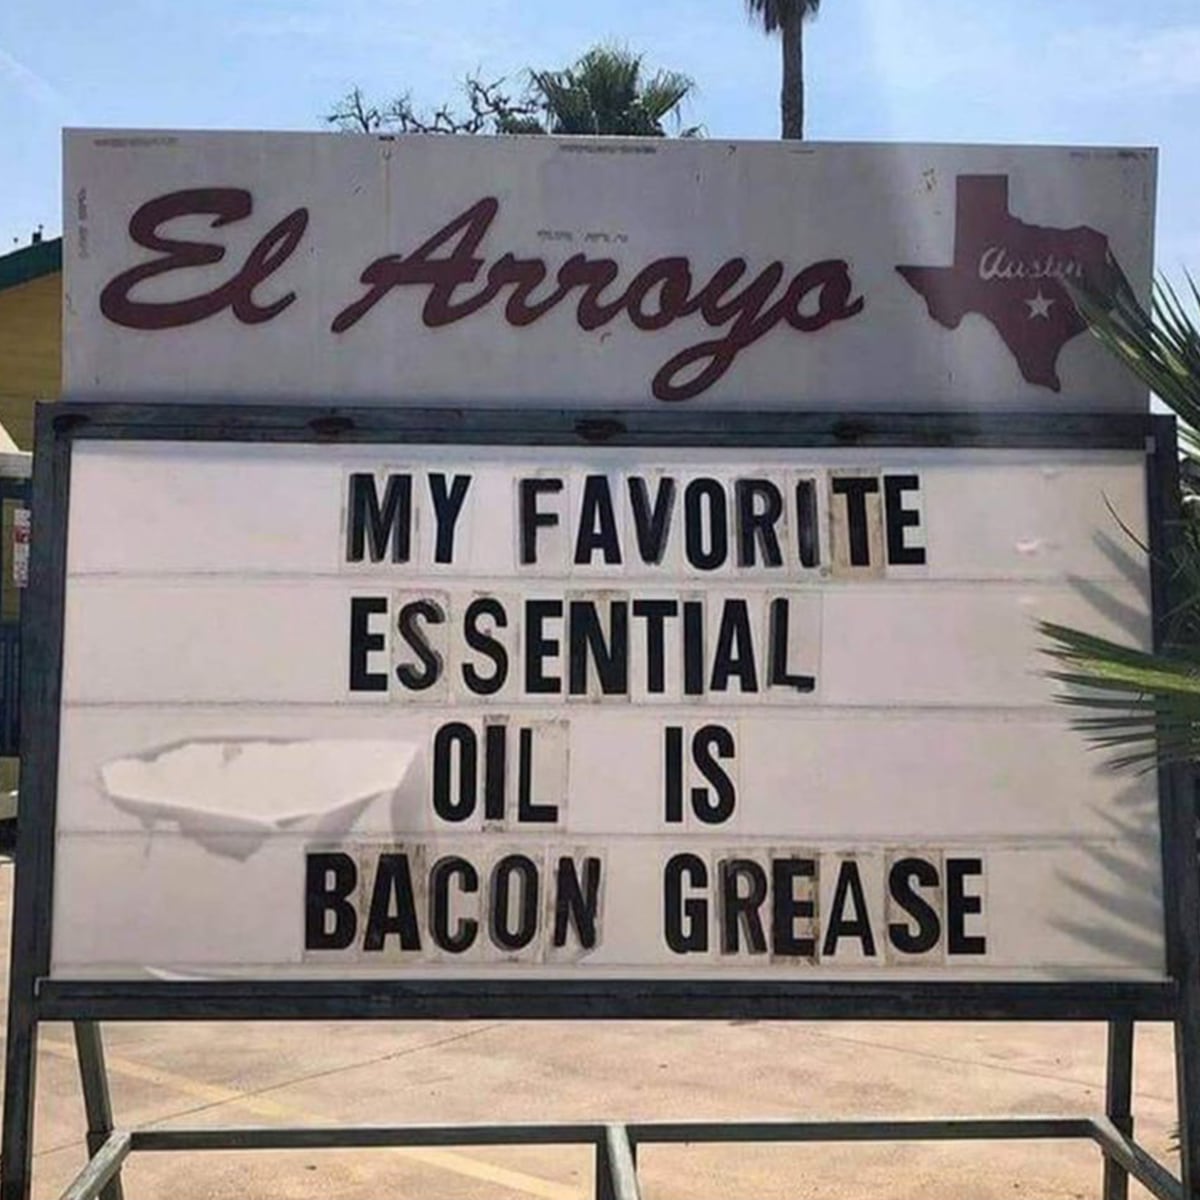 "My Favorite Essential Oil is Bacon Grease"